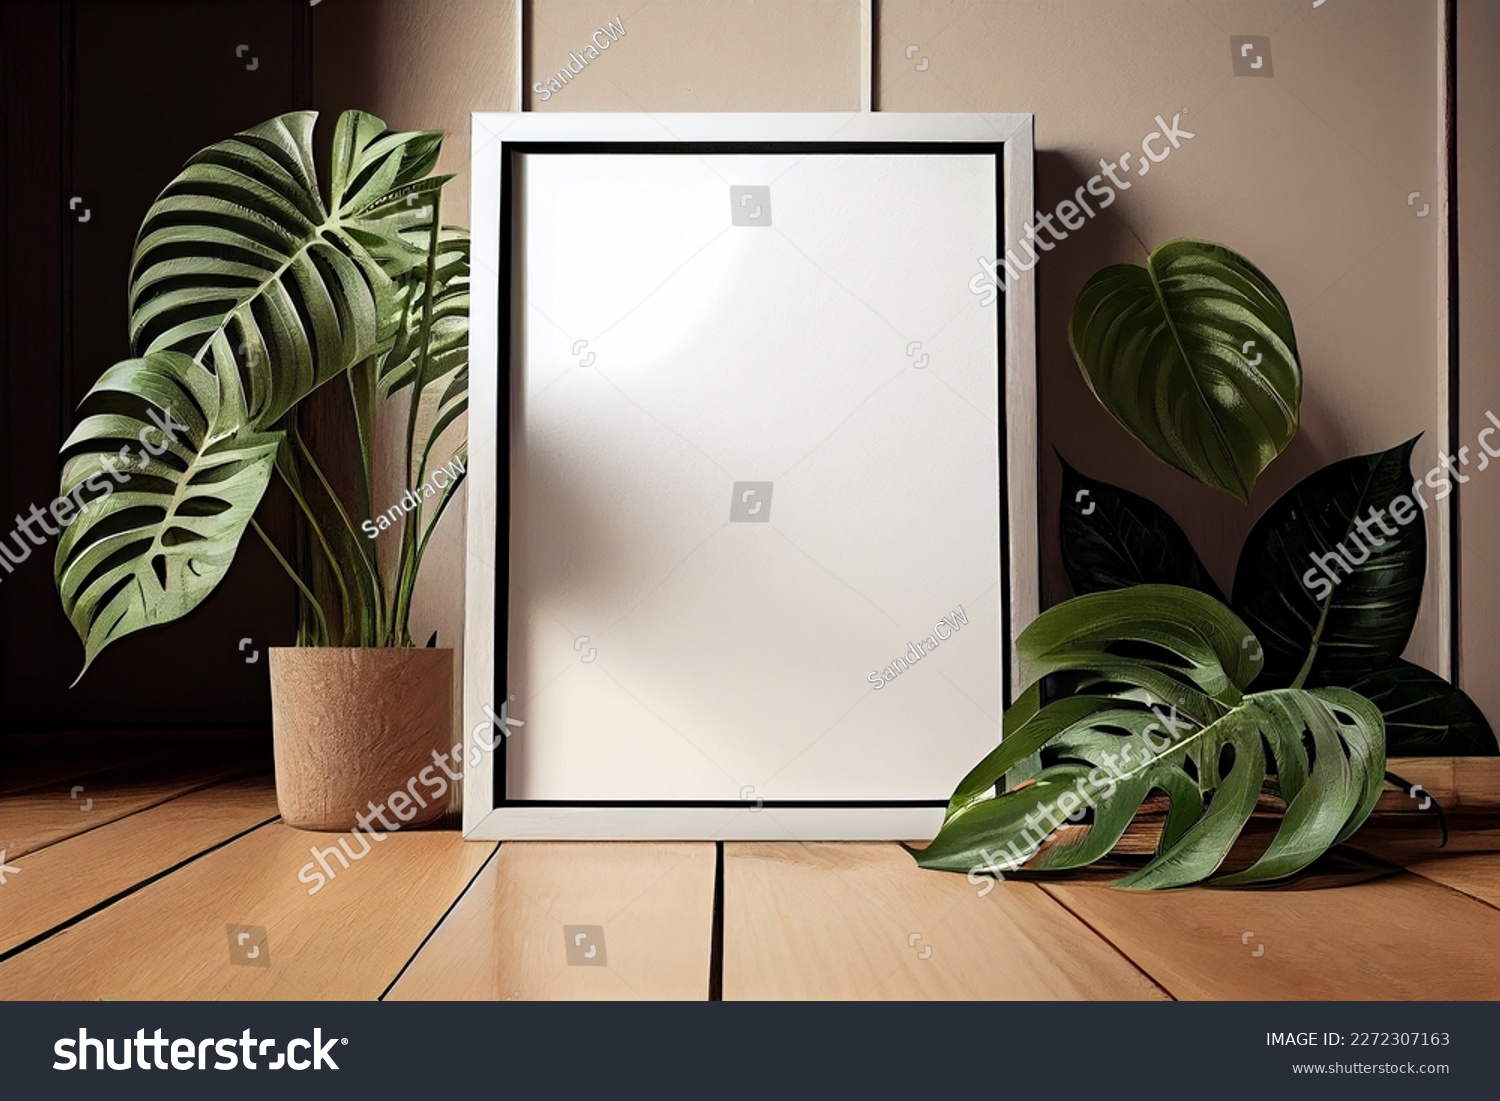 Creative mockup concept. Empty clear photo frame on boho table top and monstera leaf plants. Mock up frame for display or montage of product or design. copy space. view	
 #2272307163